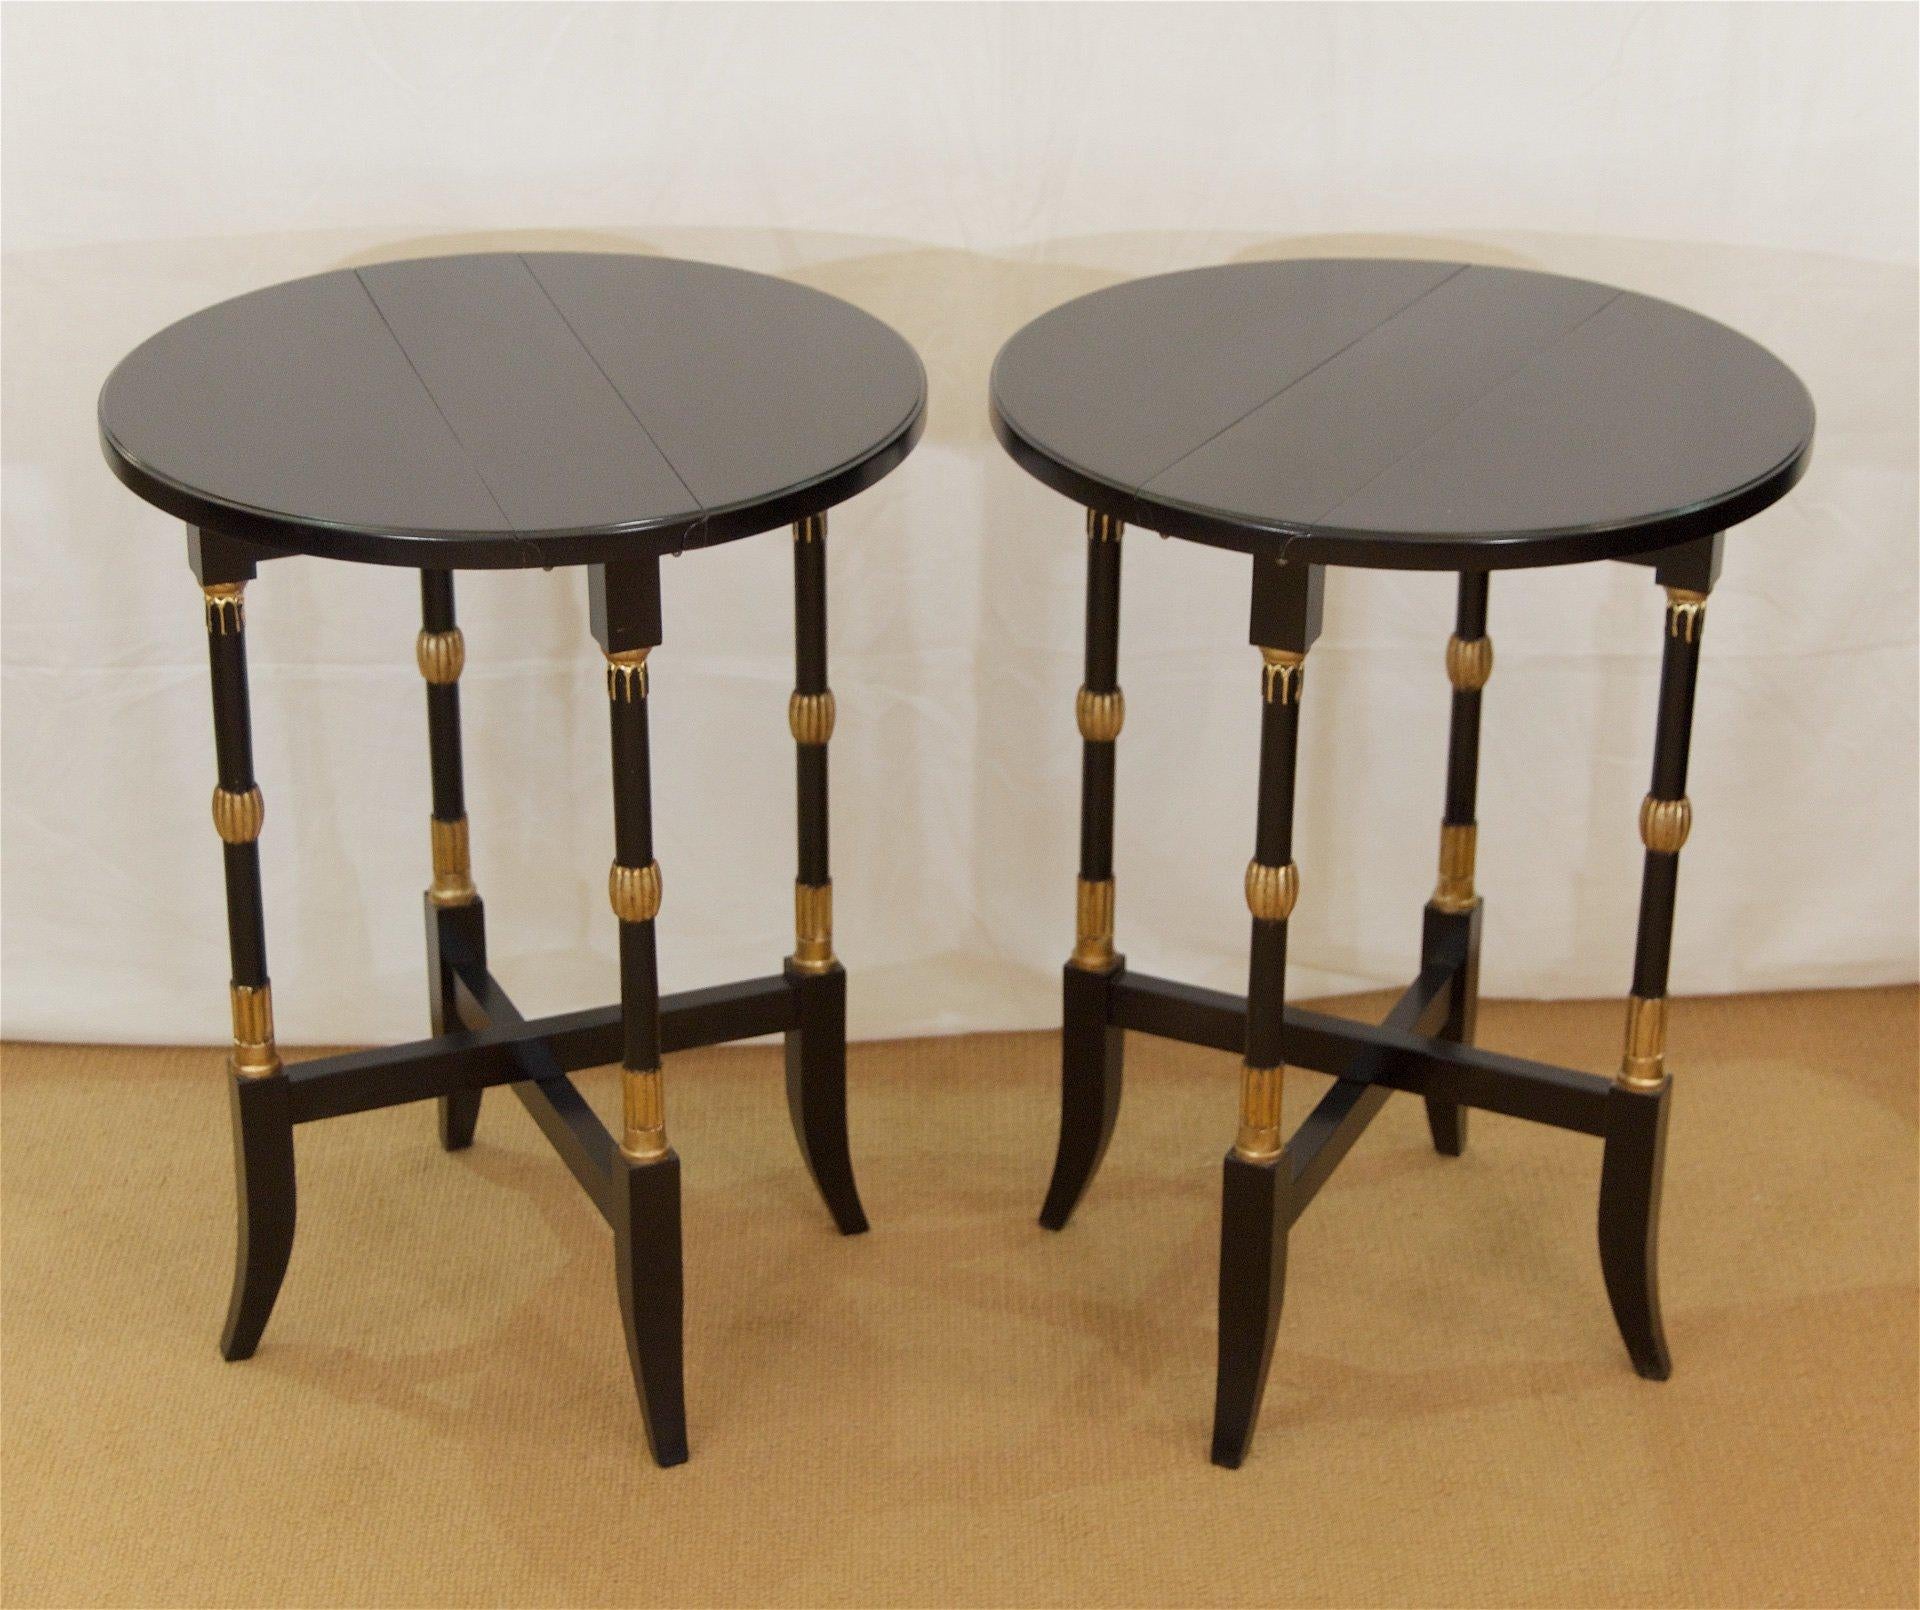 Excellently sized vintage folding occasional tables in a Regency style, original to the Fontainebleau hotel. Newly refinished in satin black lacquer with original gilt detailing to legs.

Priced per piece.

Three available refinished, two others